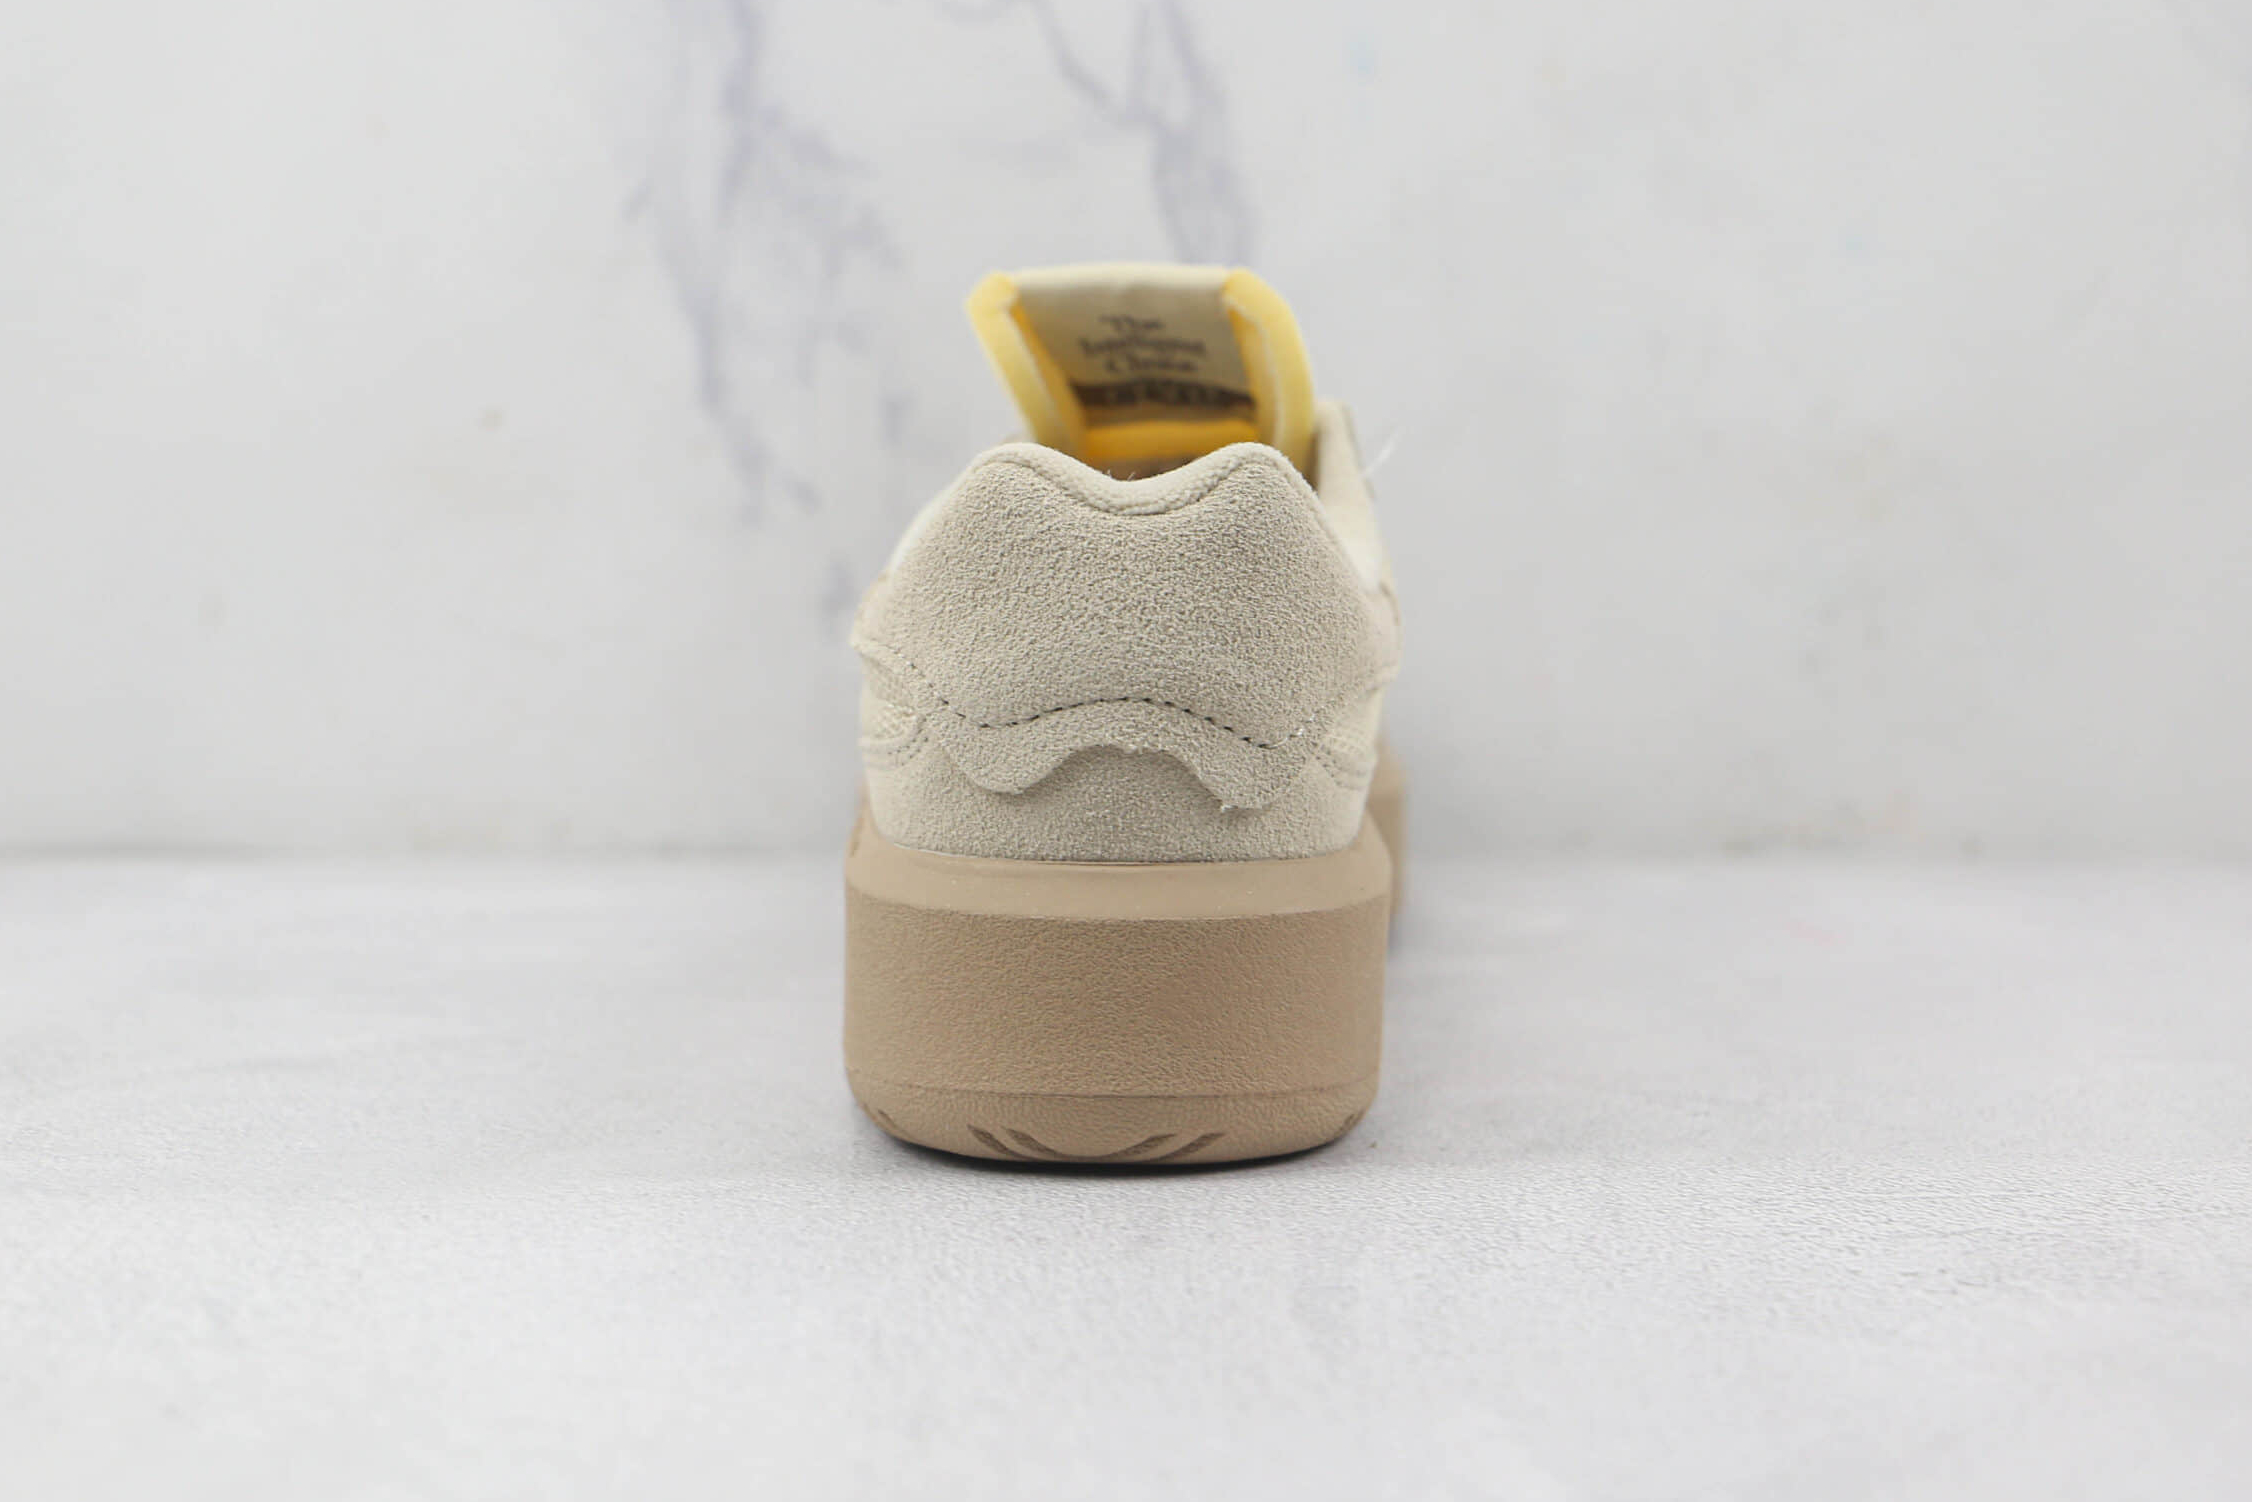 New Balance Skate Shoes 'Brown Cream' CT302WB - Stylish and Comfy Footwear